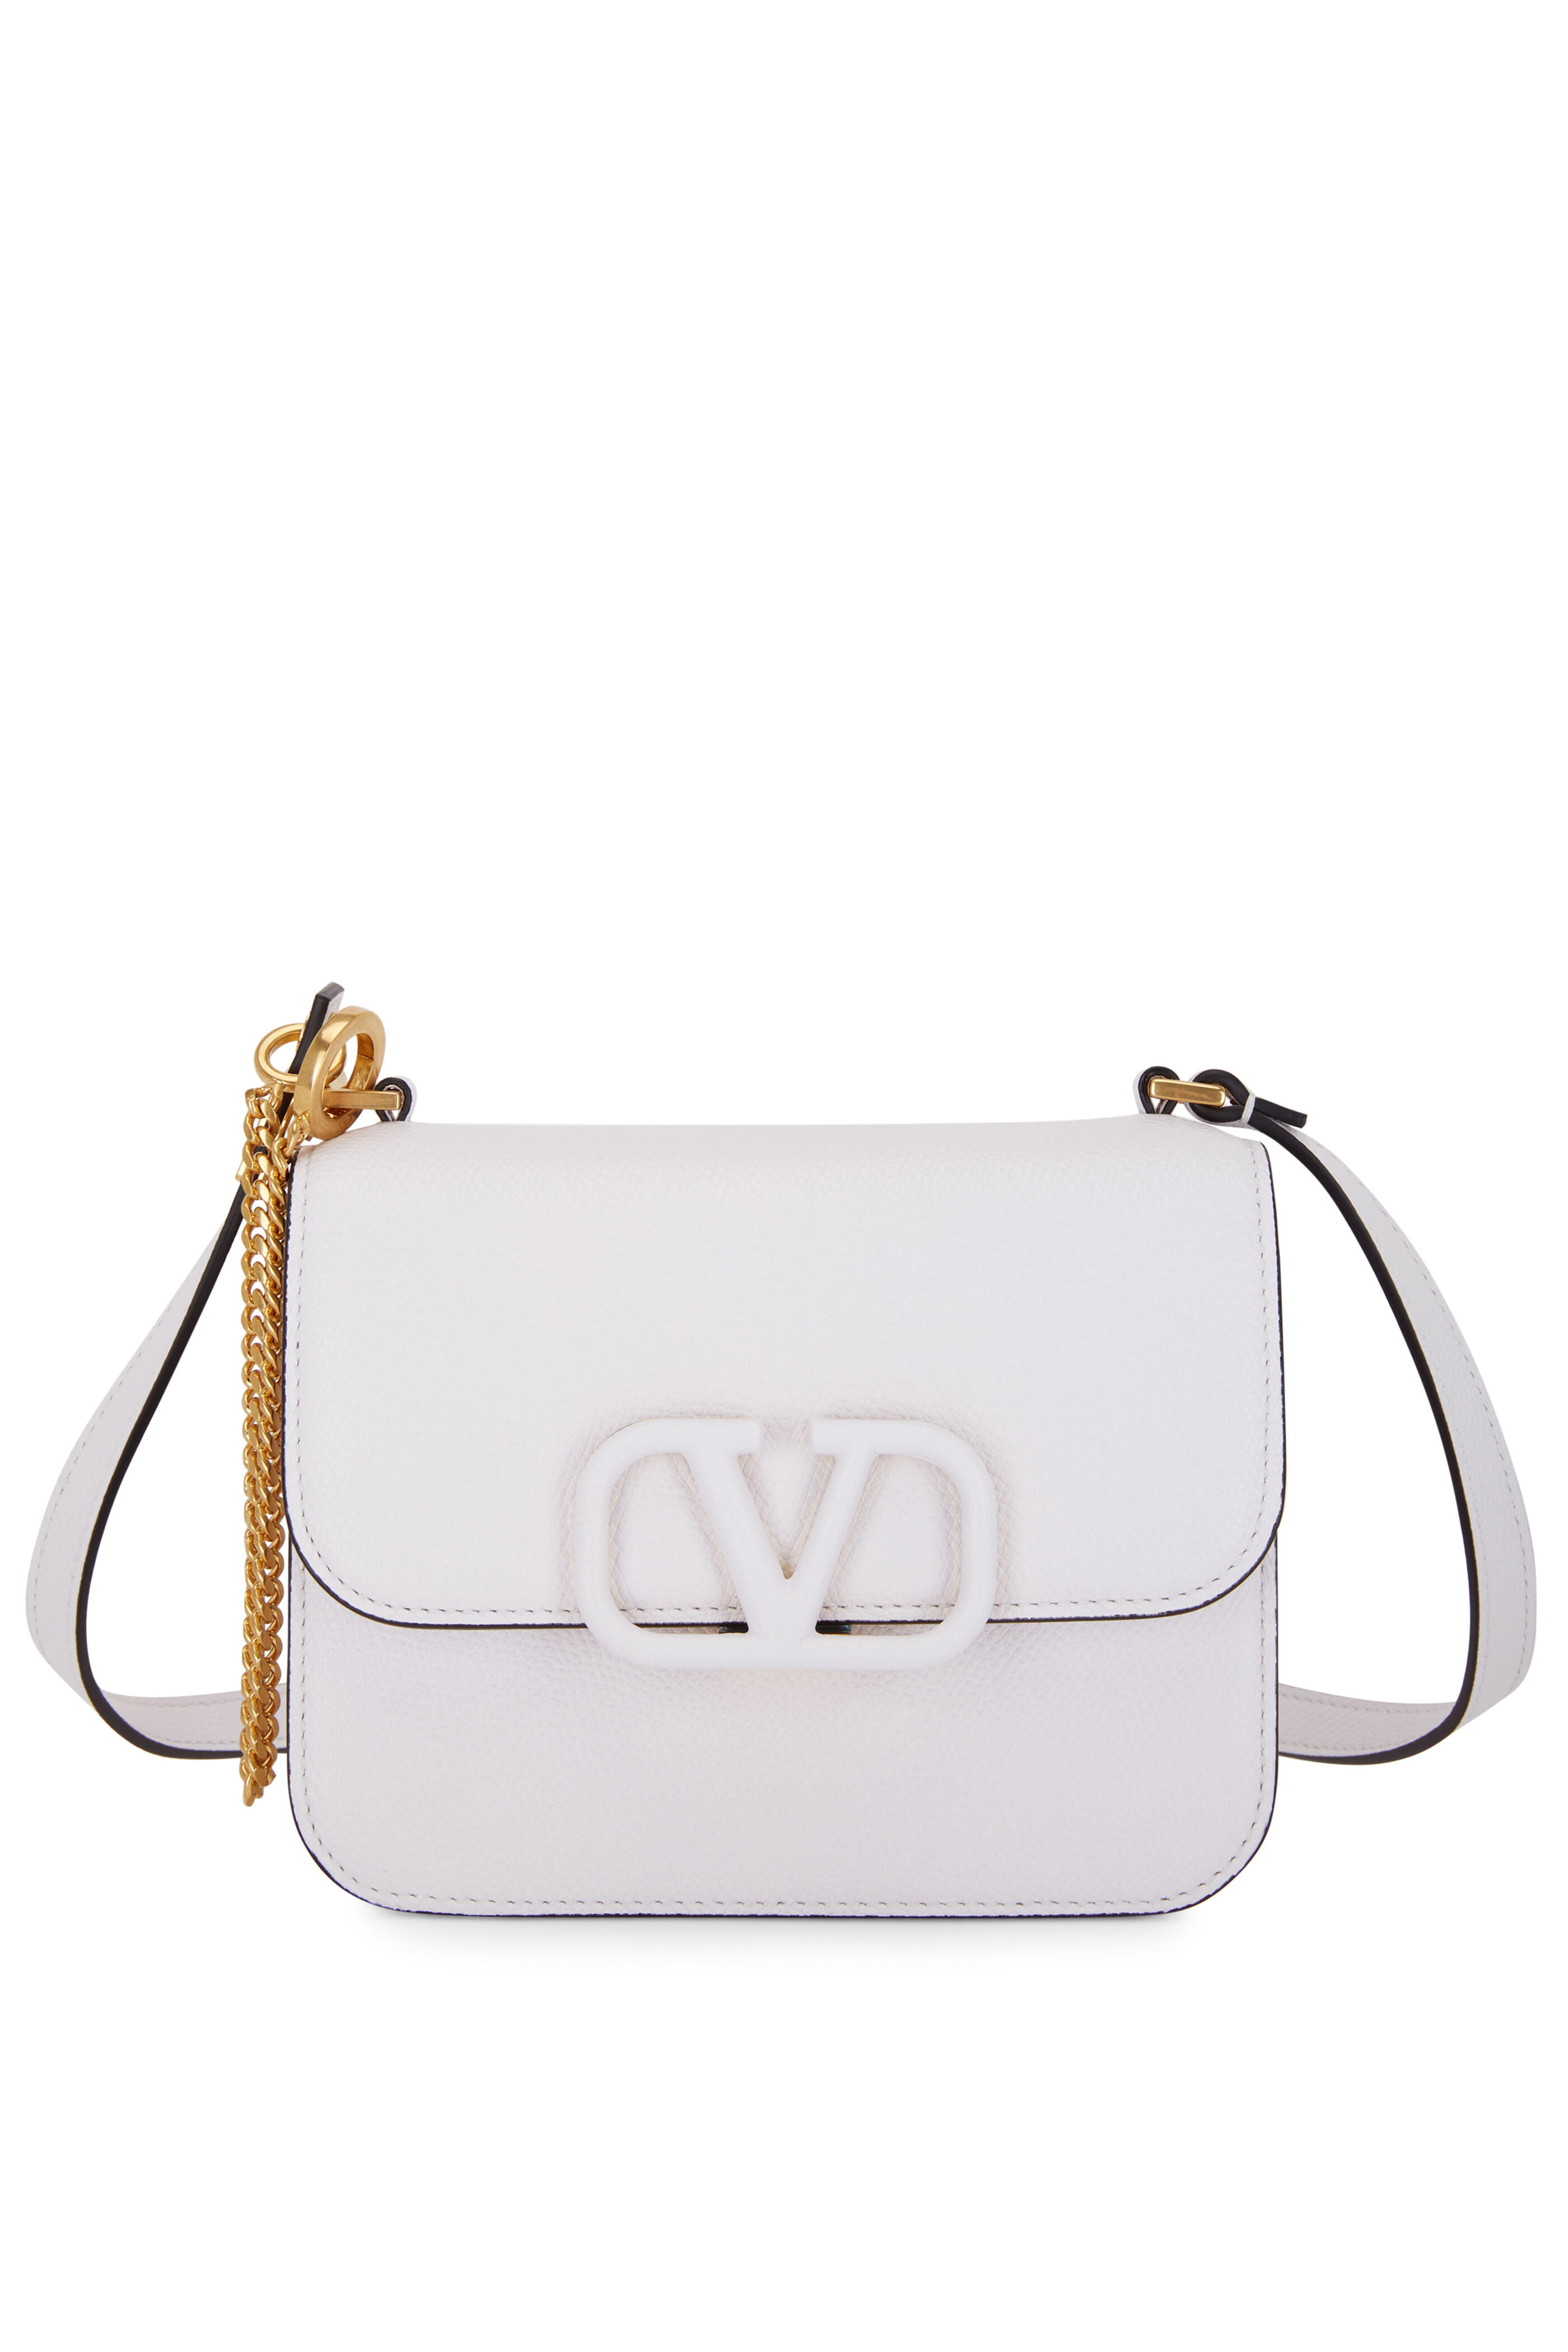 Buy V+BENIE Tassel Small Crossbody Bag with Chain Strap Small Purse Handbags  for Women, Camera Bag-white, One Size at